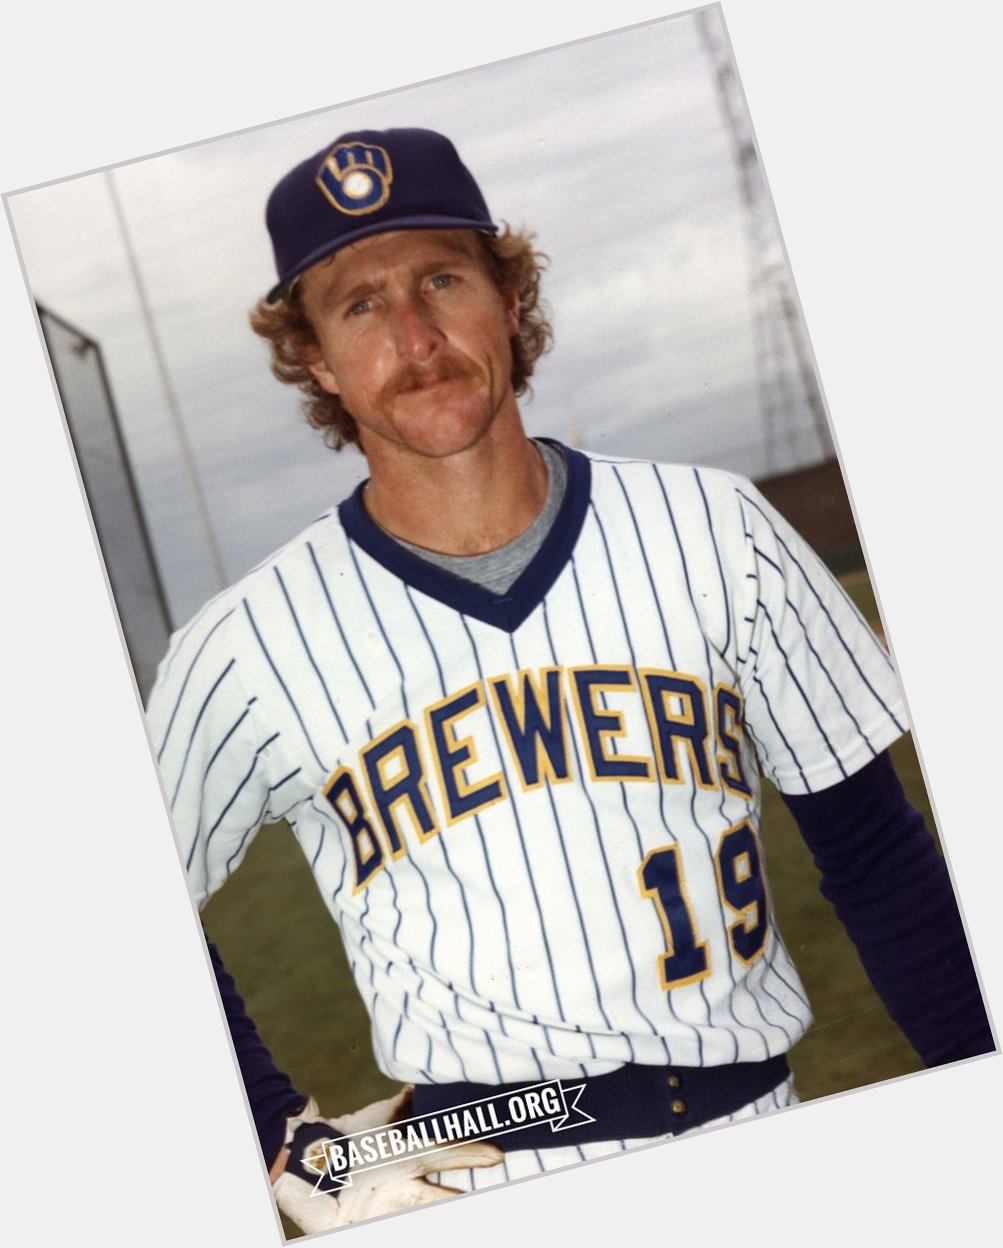 The Kid turns 63 today! Happy birthday to legend Robin Yount.  